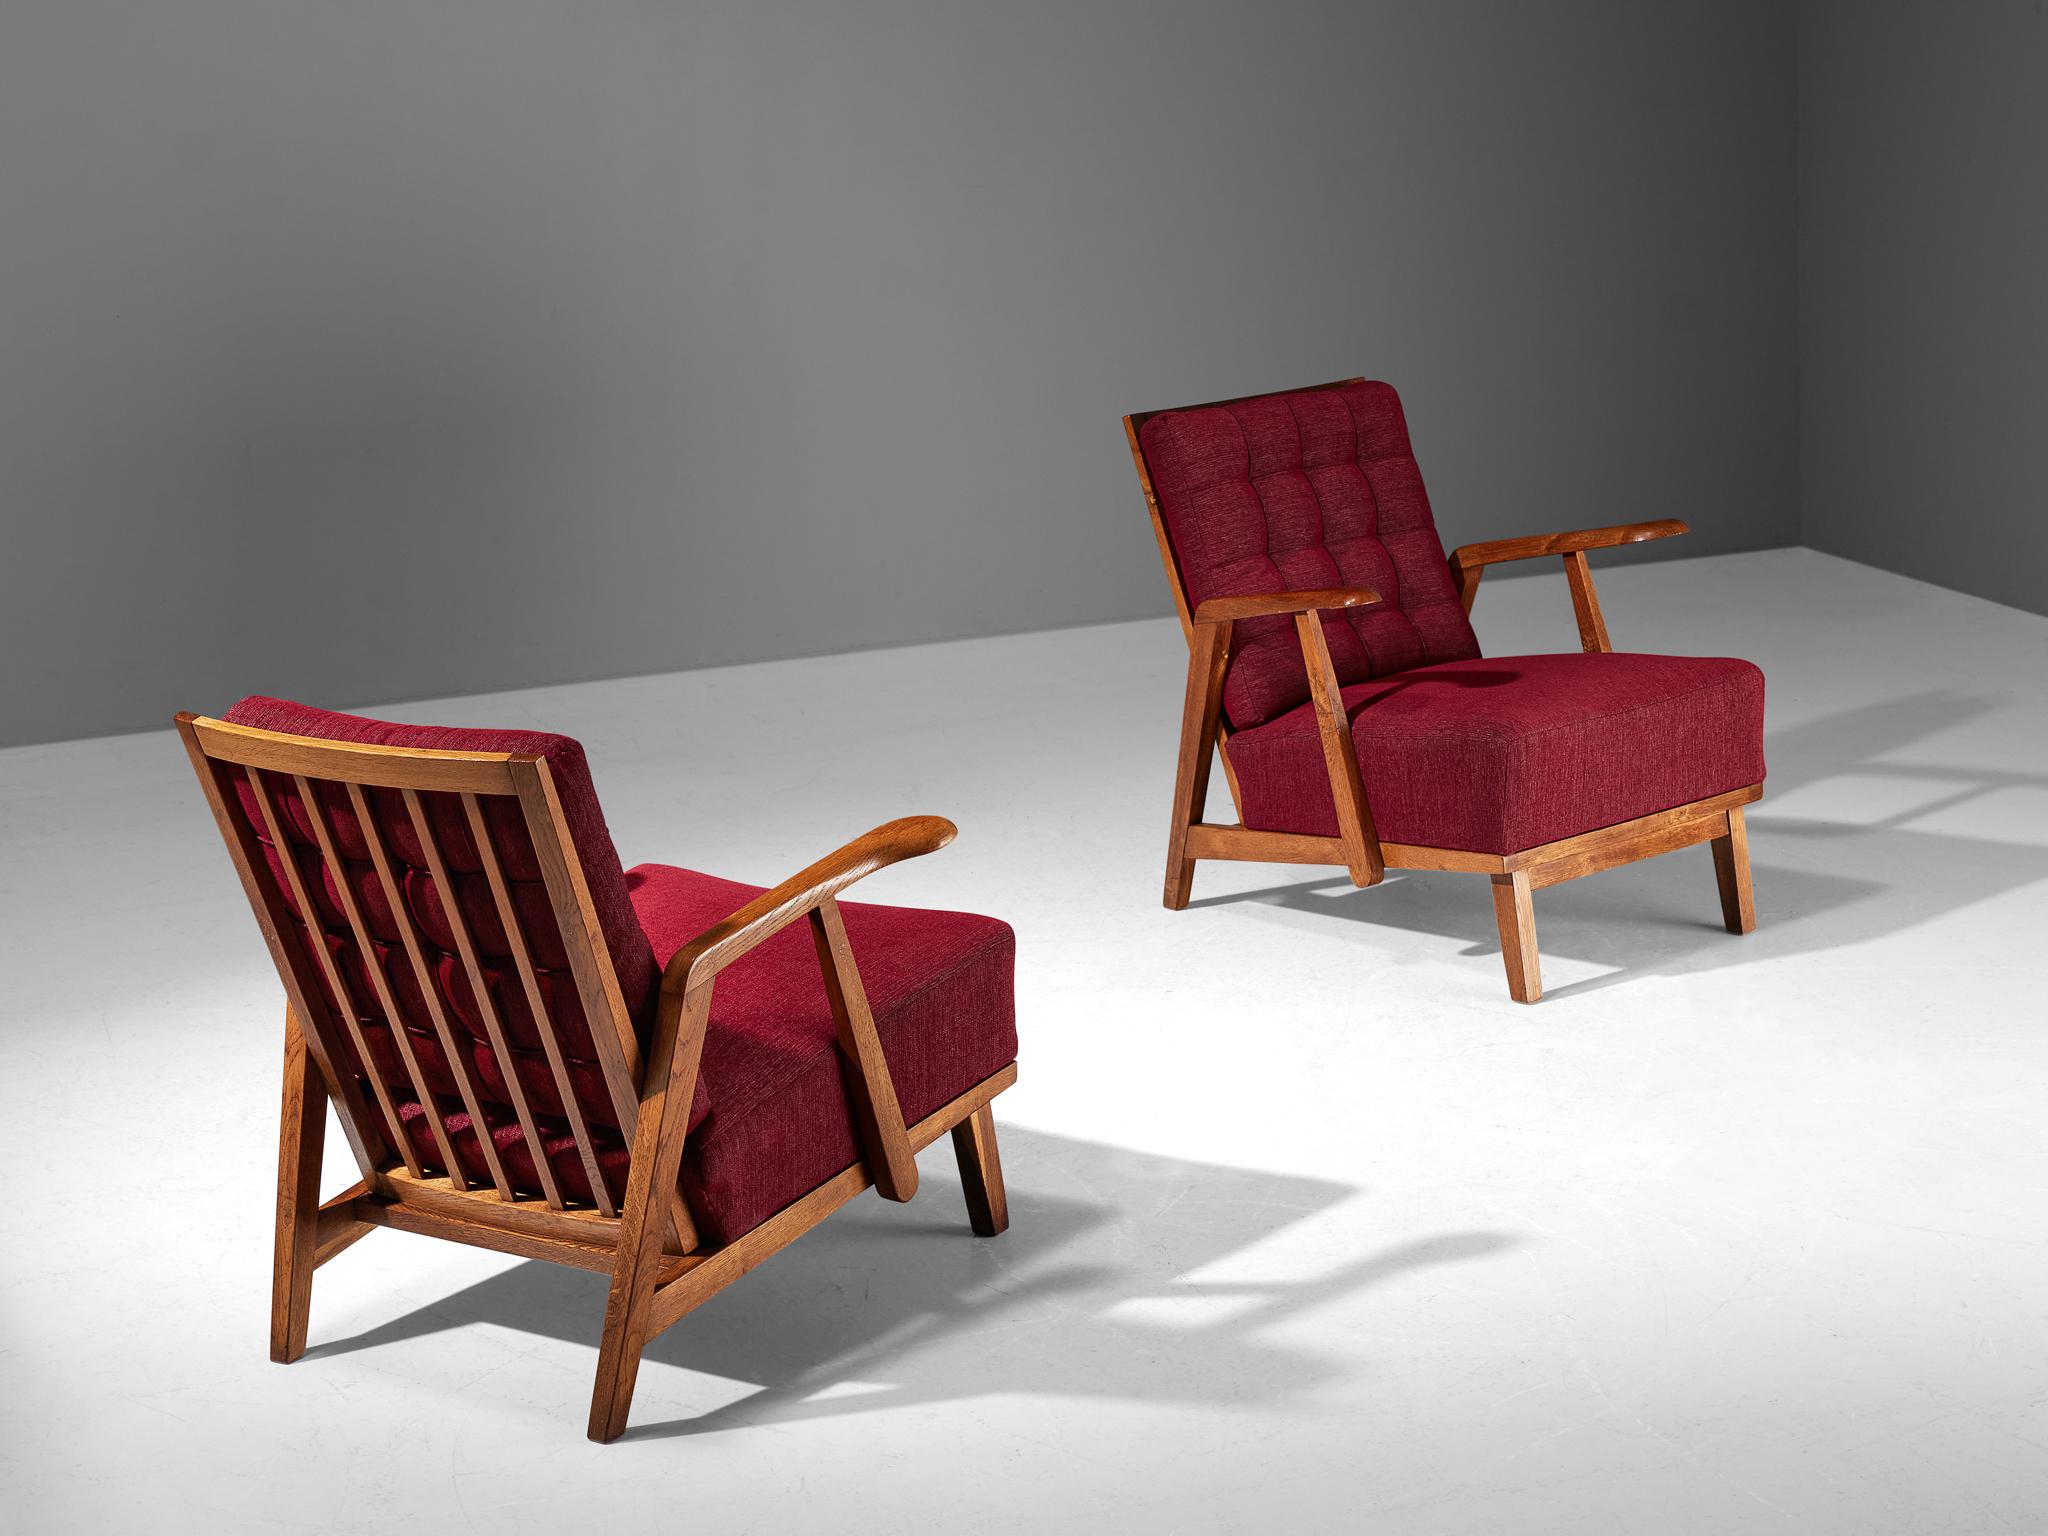 Pair of lounge chairs, oak, fabric, Czech Republic, 1950s

These beautifully designed lounge chairs hold a striking construction by means of the sculpted elements discernible in the wooden frame. The armrests are characterized by curved, strong